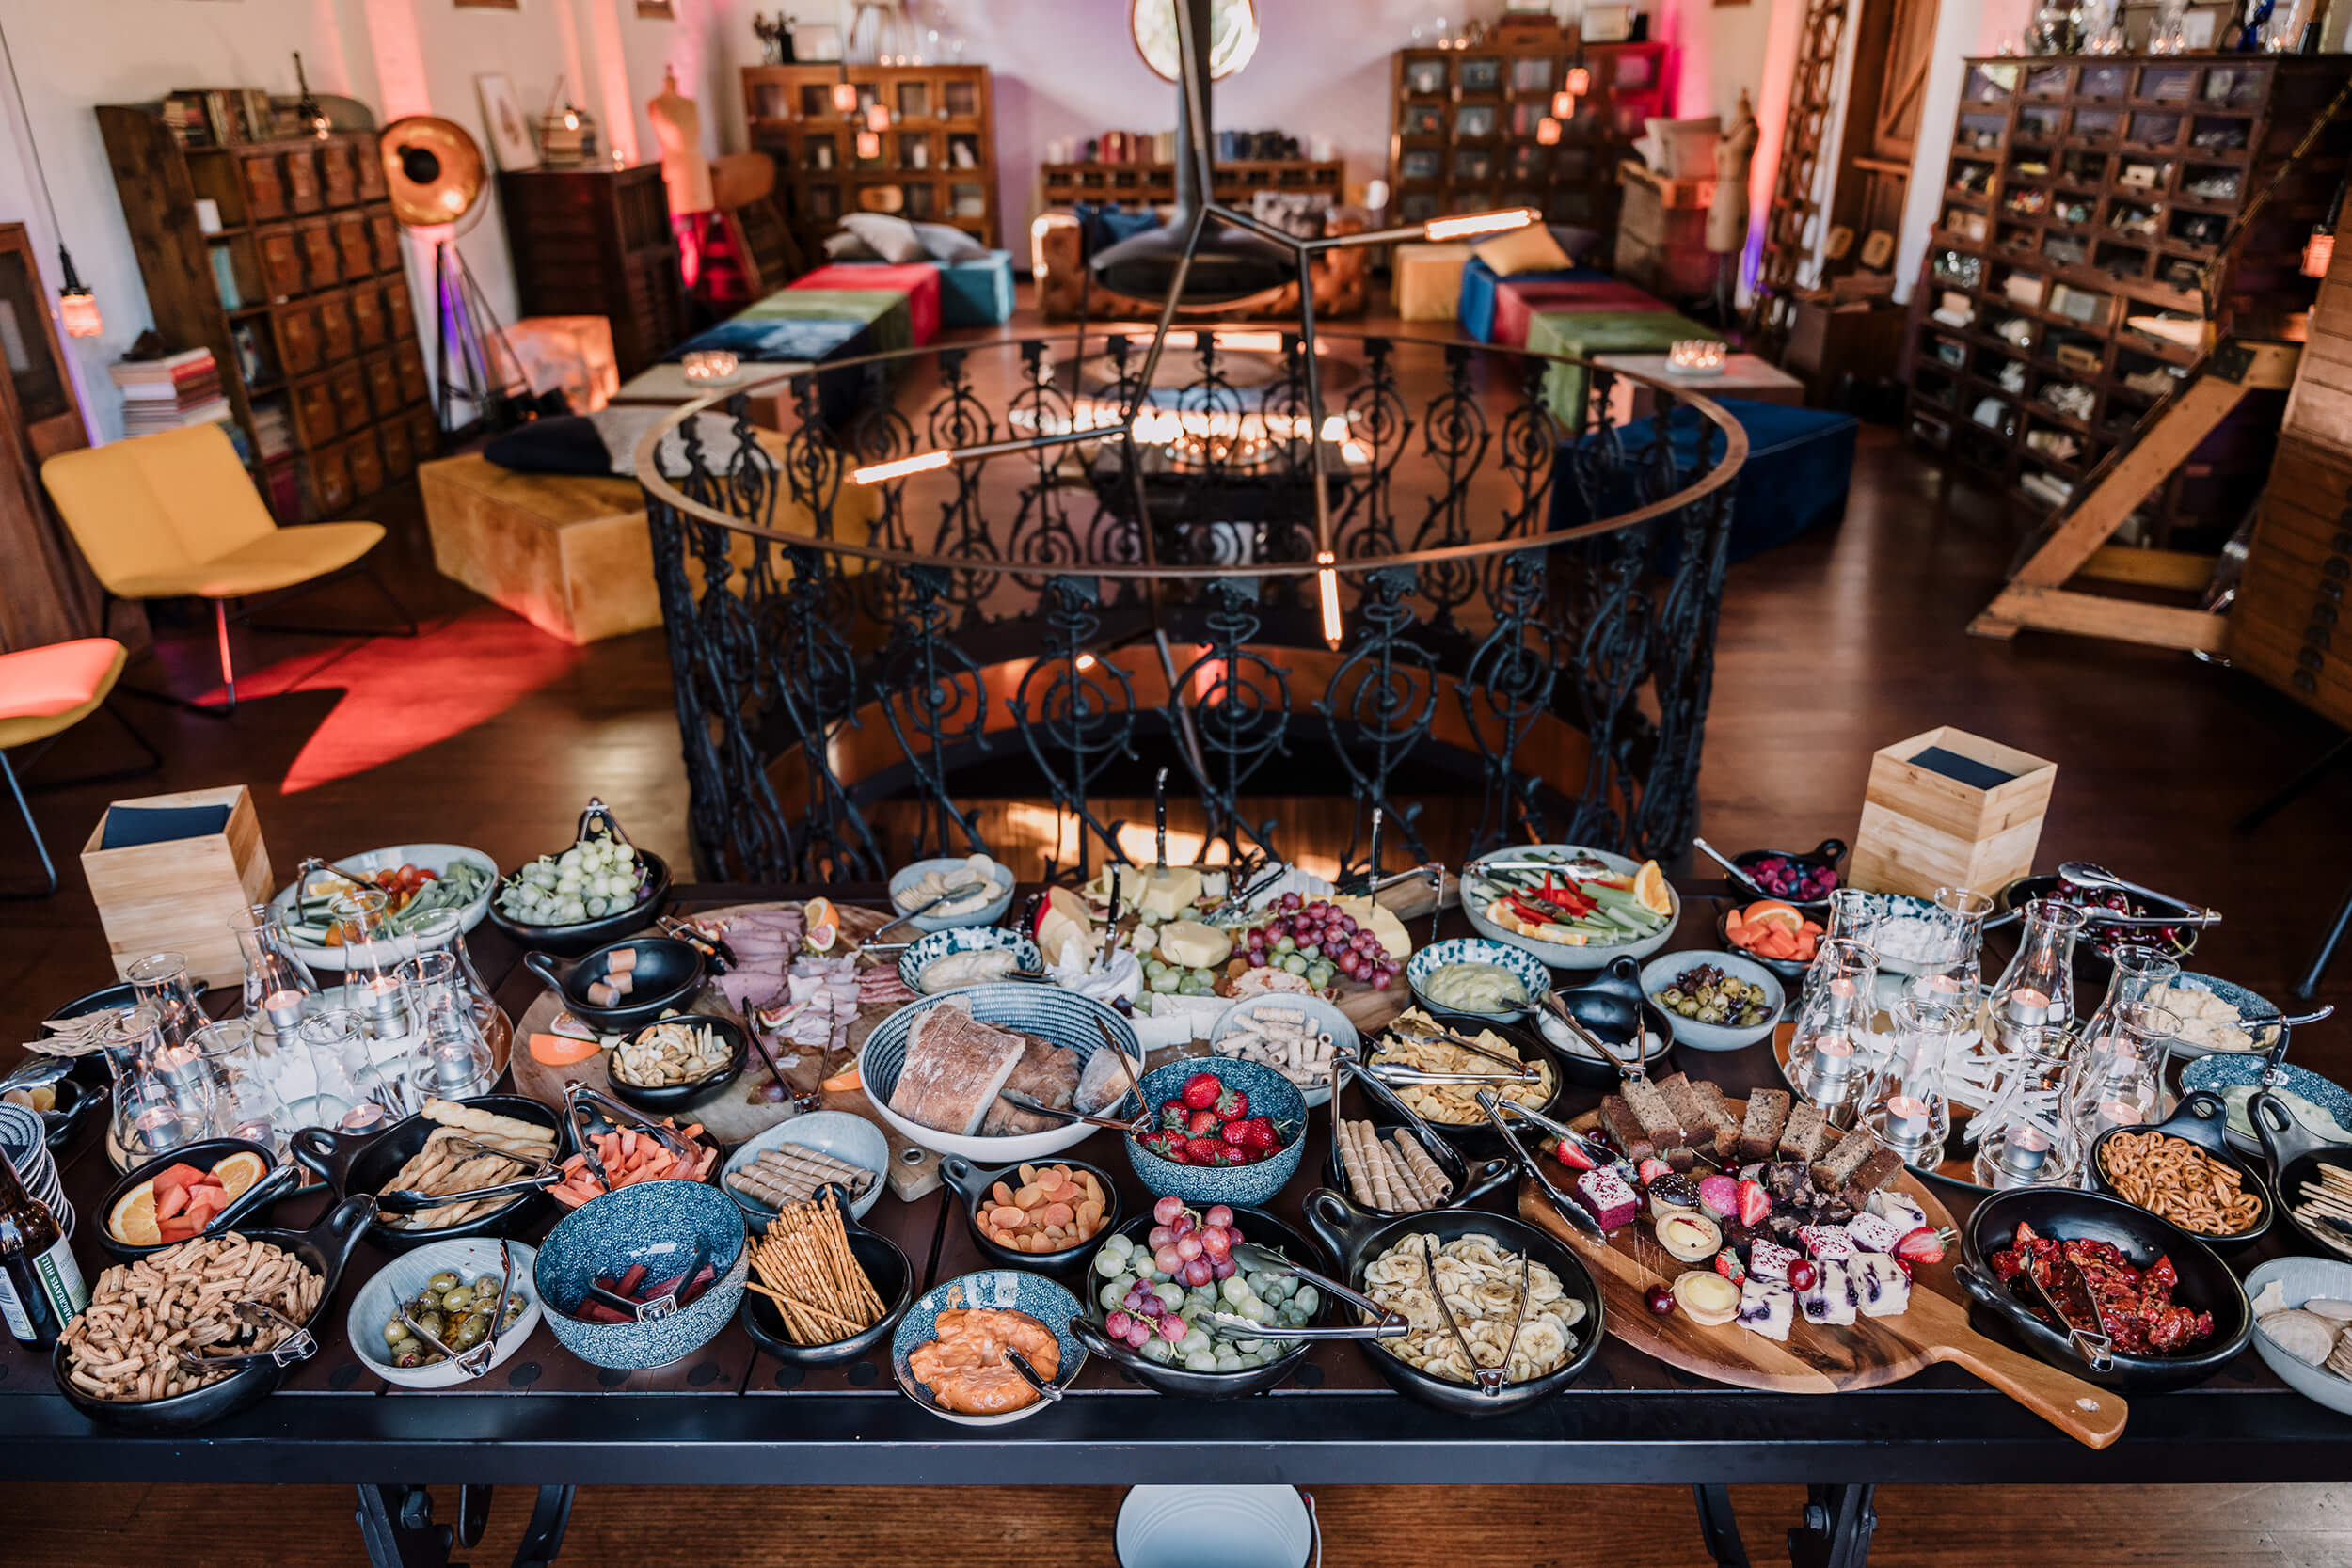 Food is ready for all of the guests, captured by Black Avenue Productions